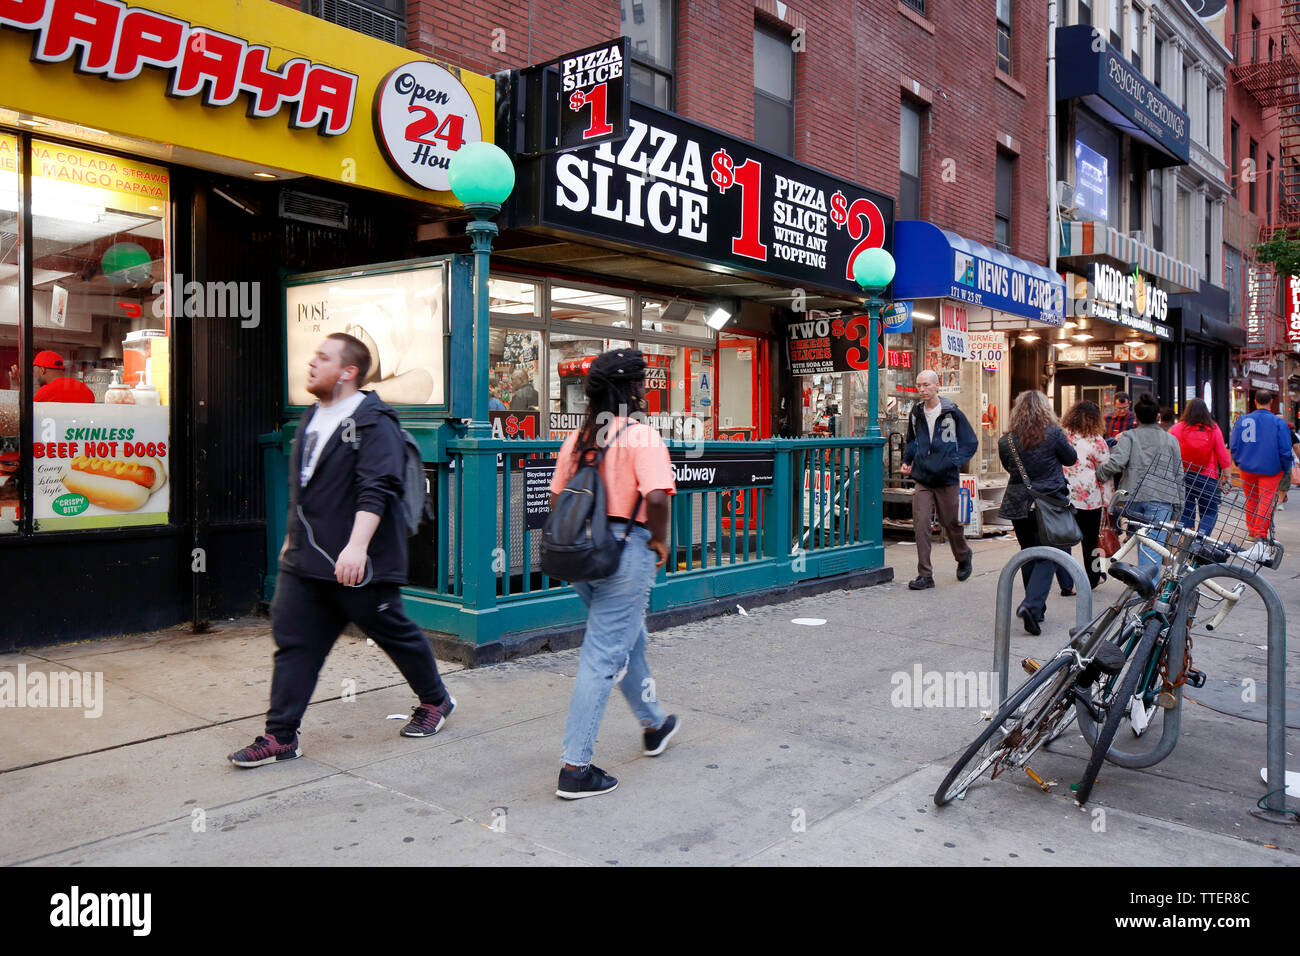 People walk past fast food restaurants along West 23rd Street and 6th ave in Manhattan, New York, NY. Stock Photo